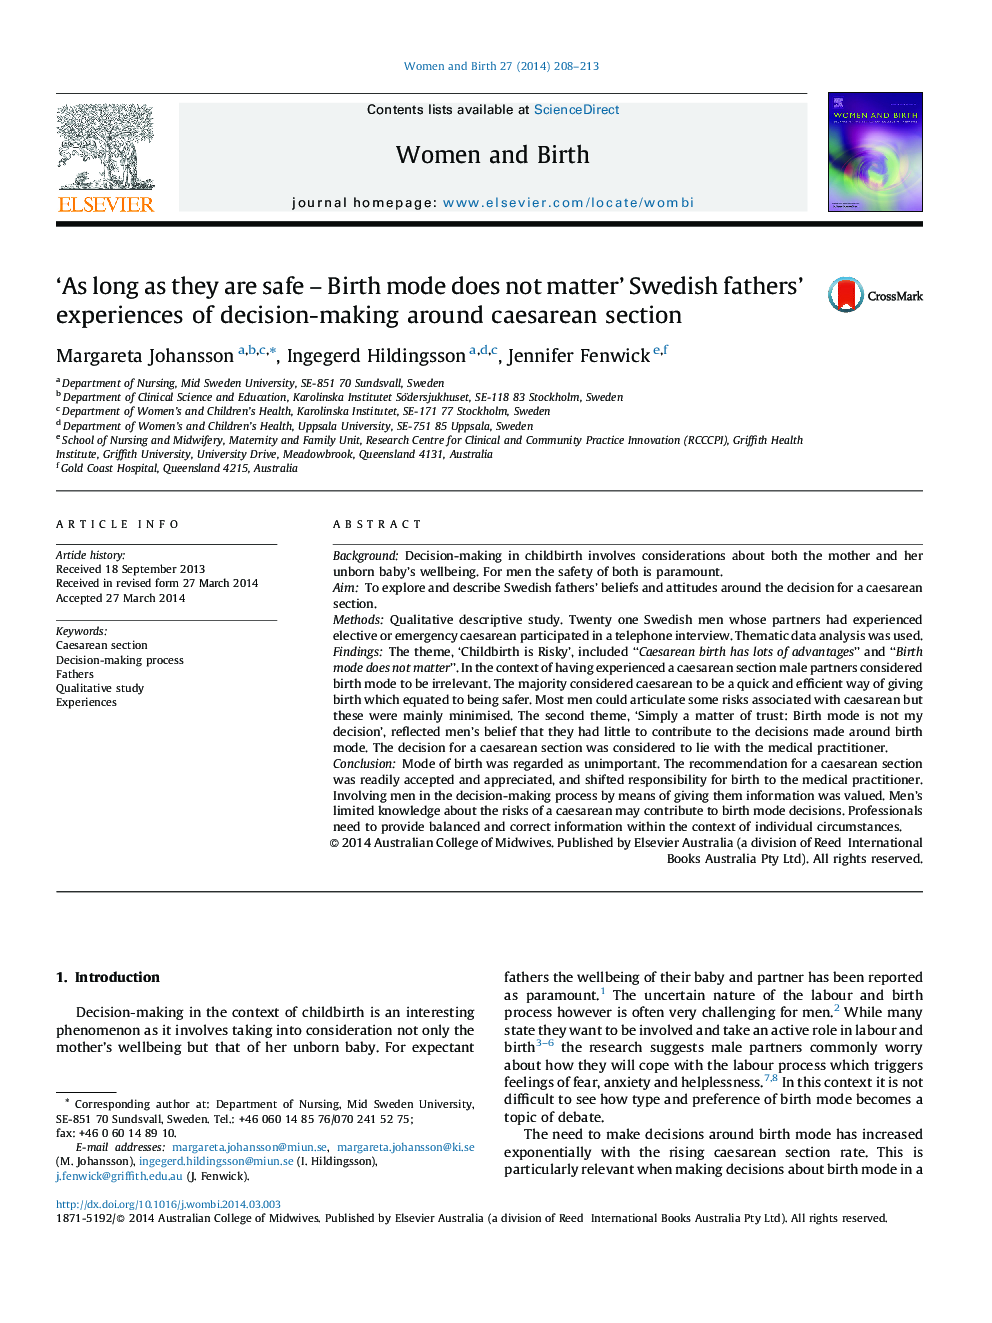 ‘As long as they are safe – Birth mode does not matter’ Swedish fathers’ experiences of decision-making around caesarean section